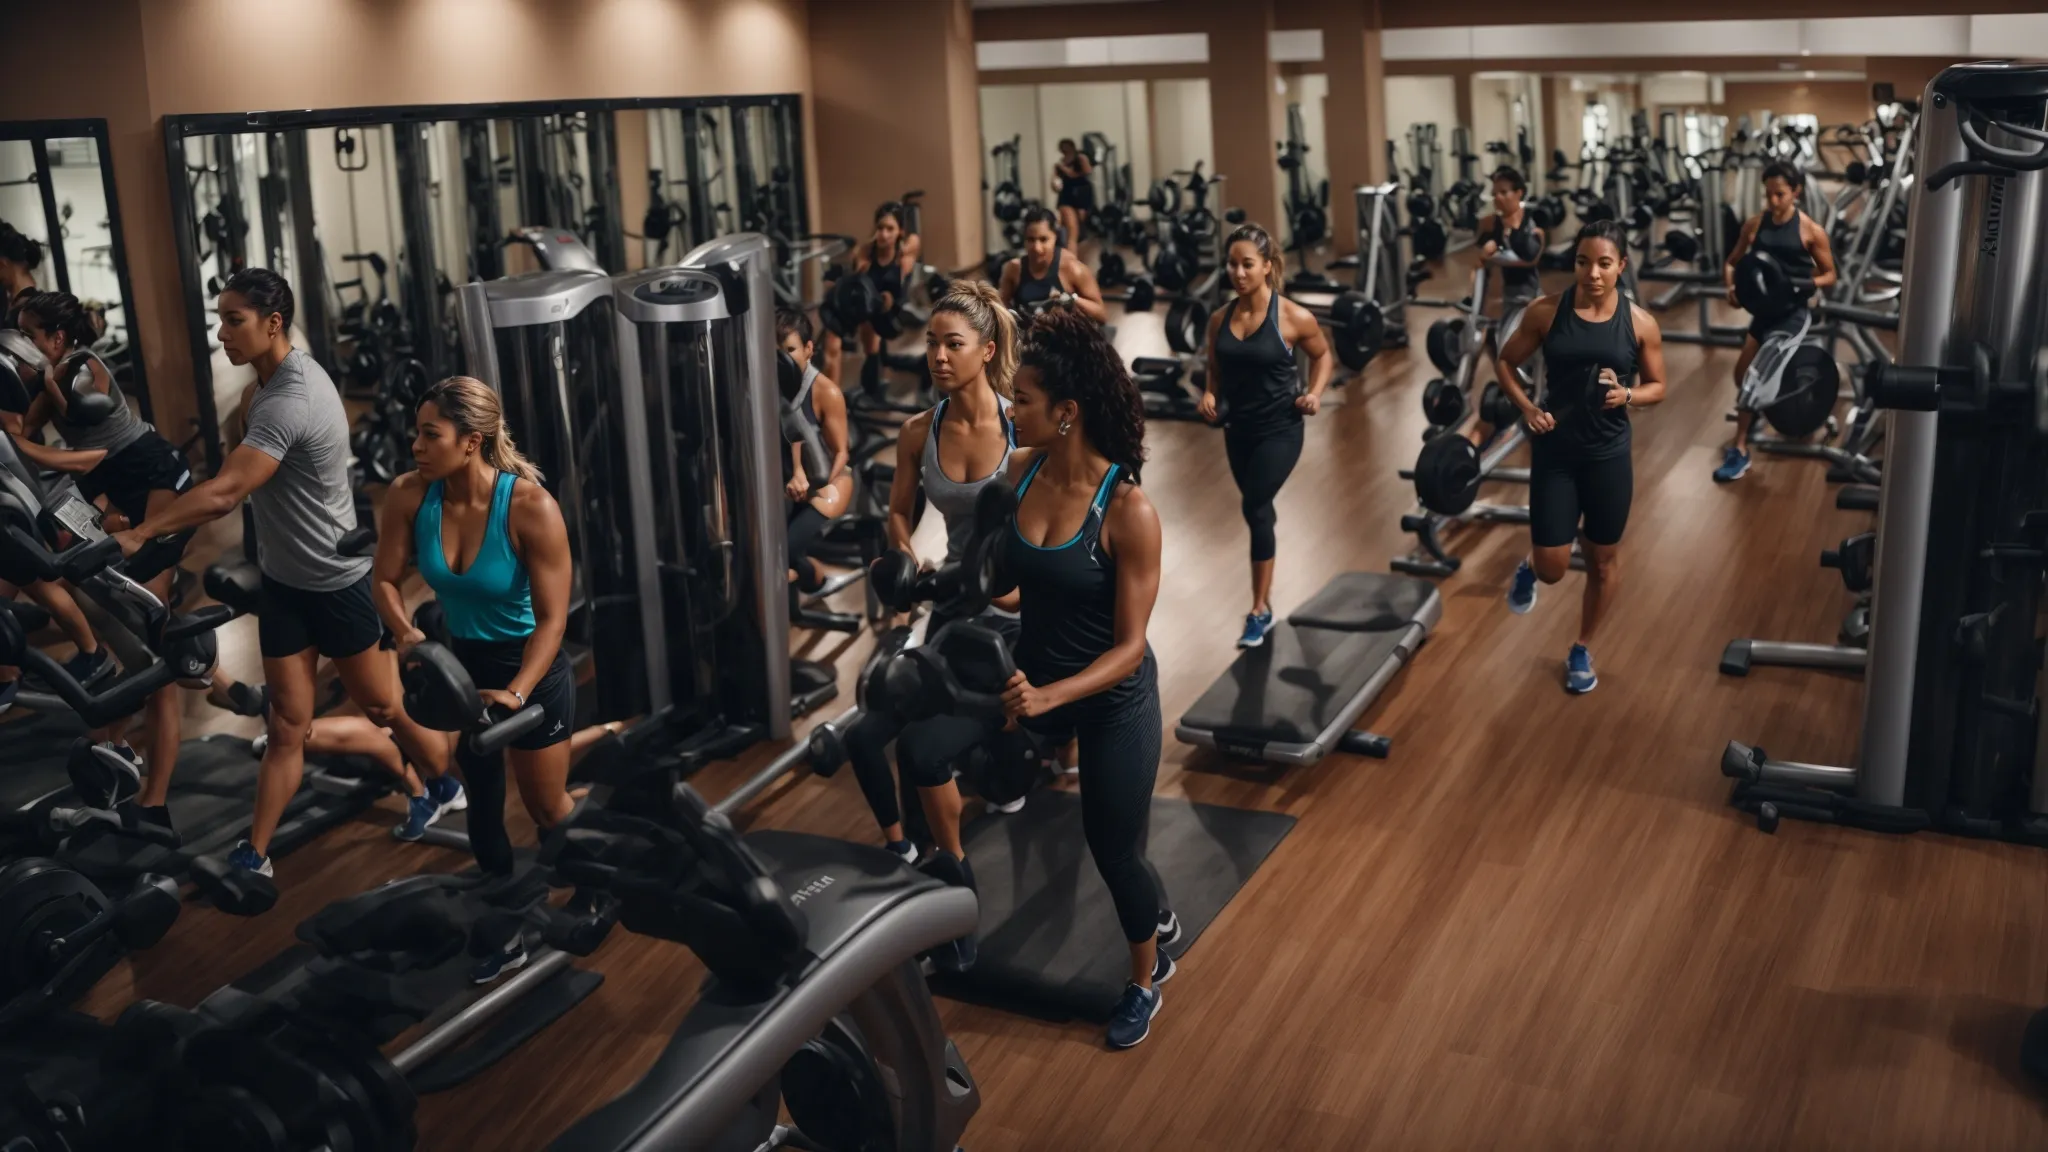 a fitness center bustling with activity as members engage in various workouts.